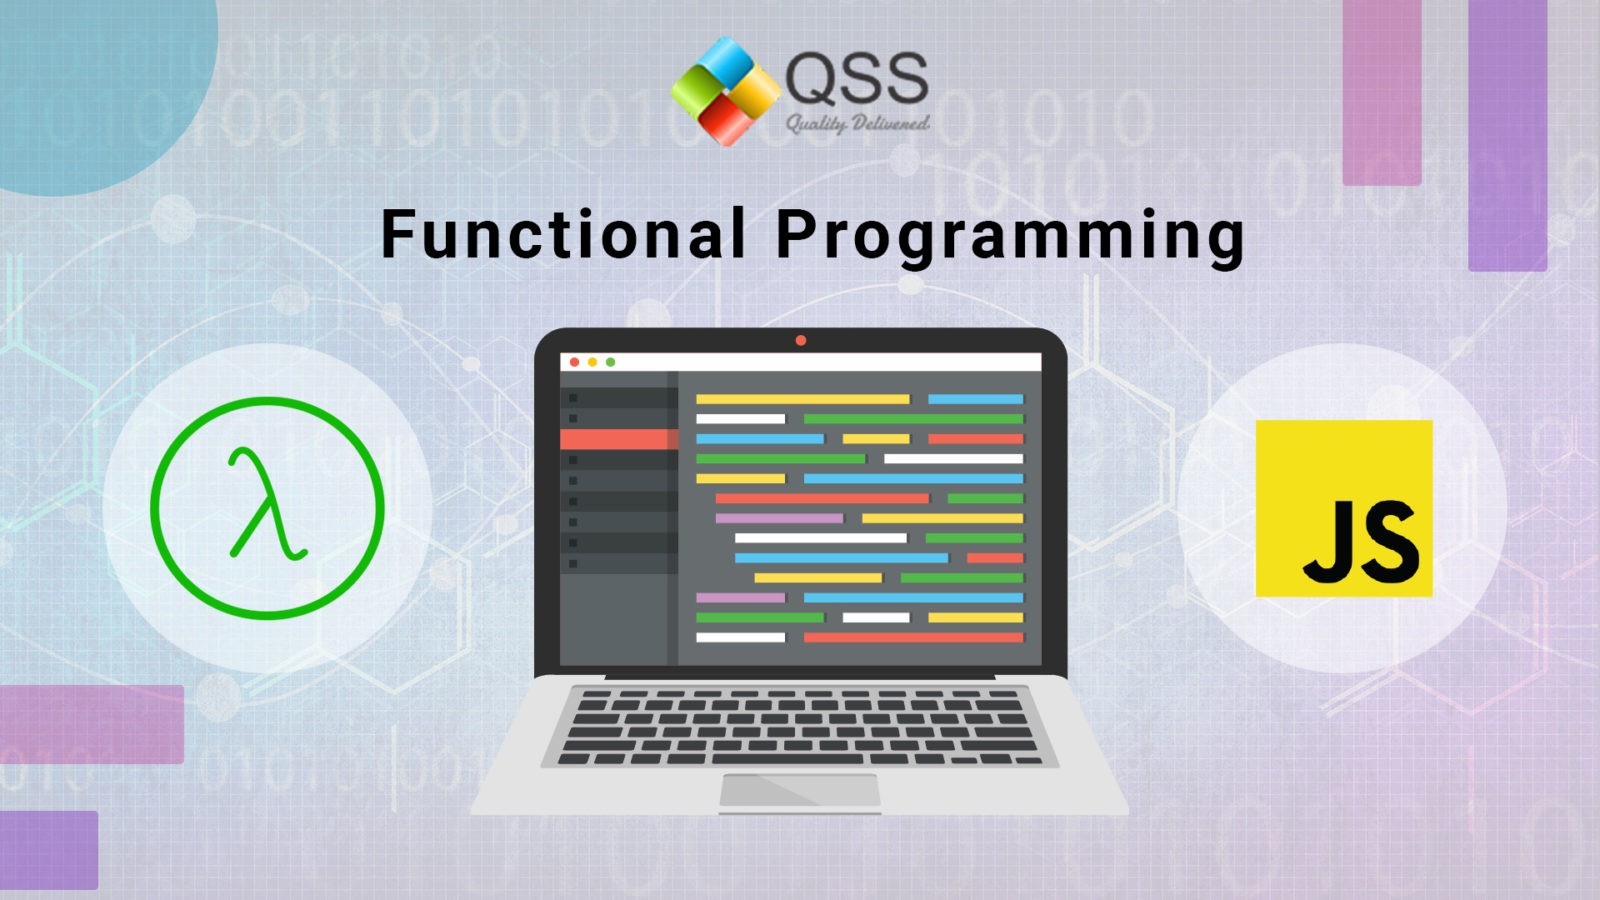 An Introduction to the basic principles of Functional Programming